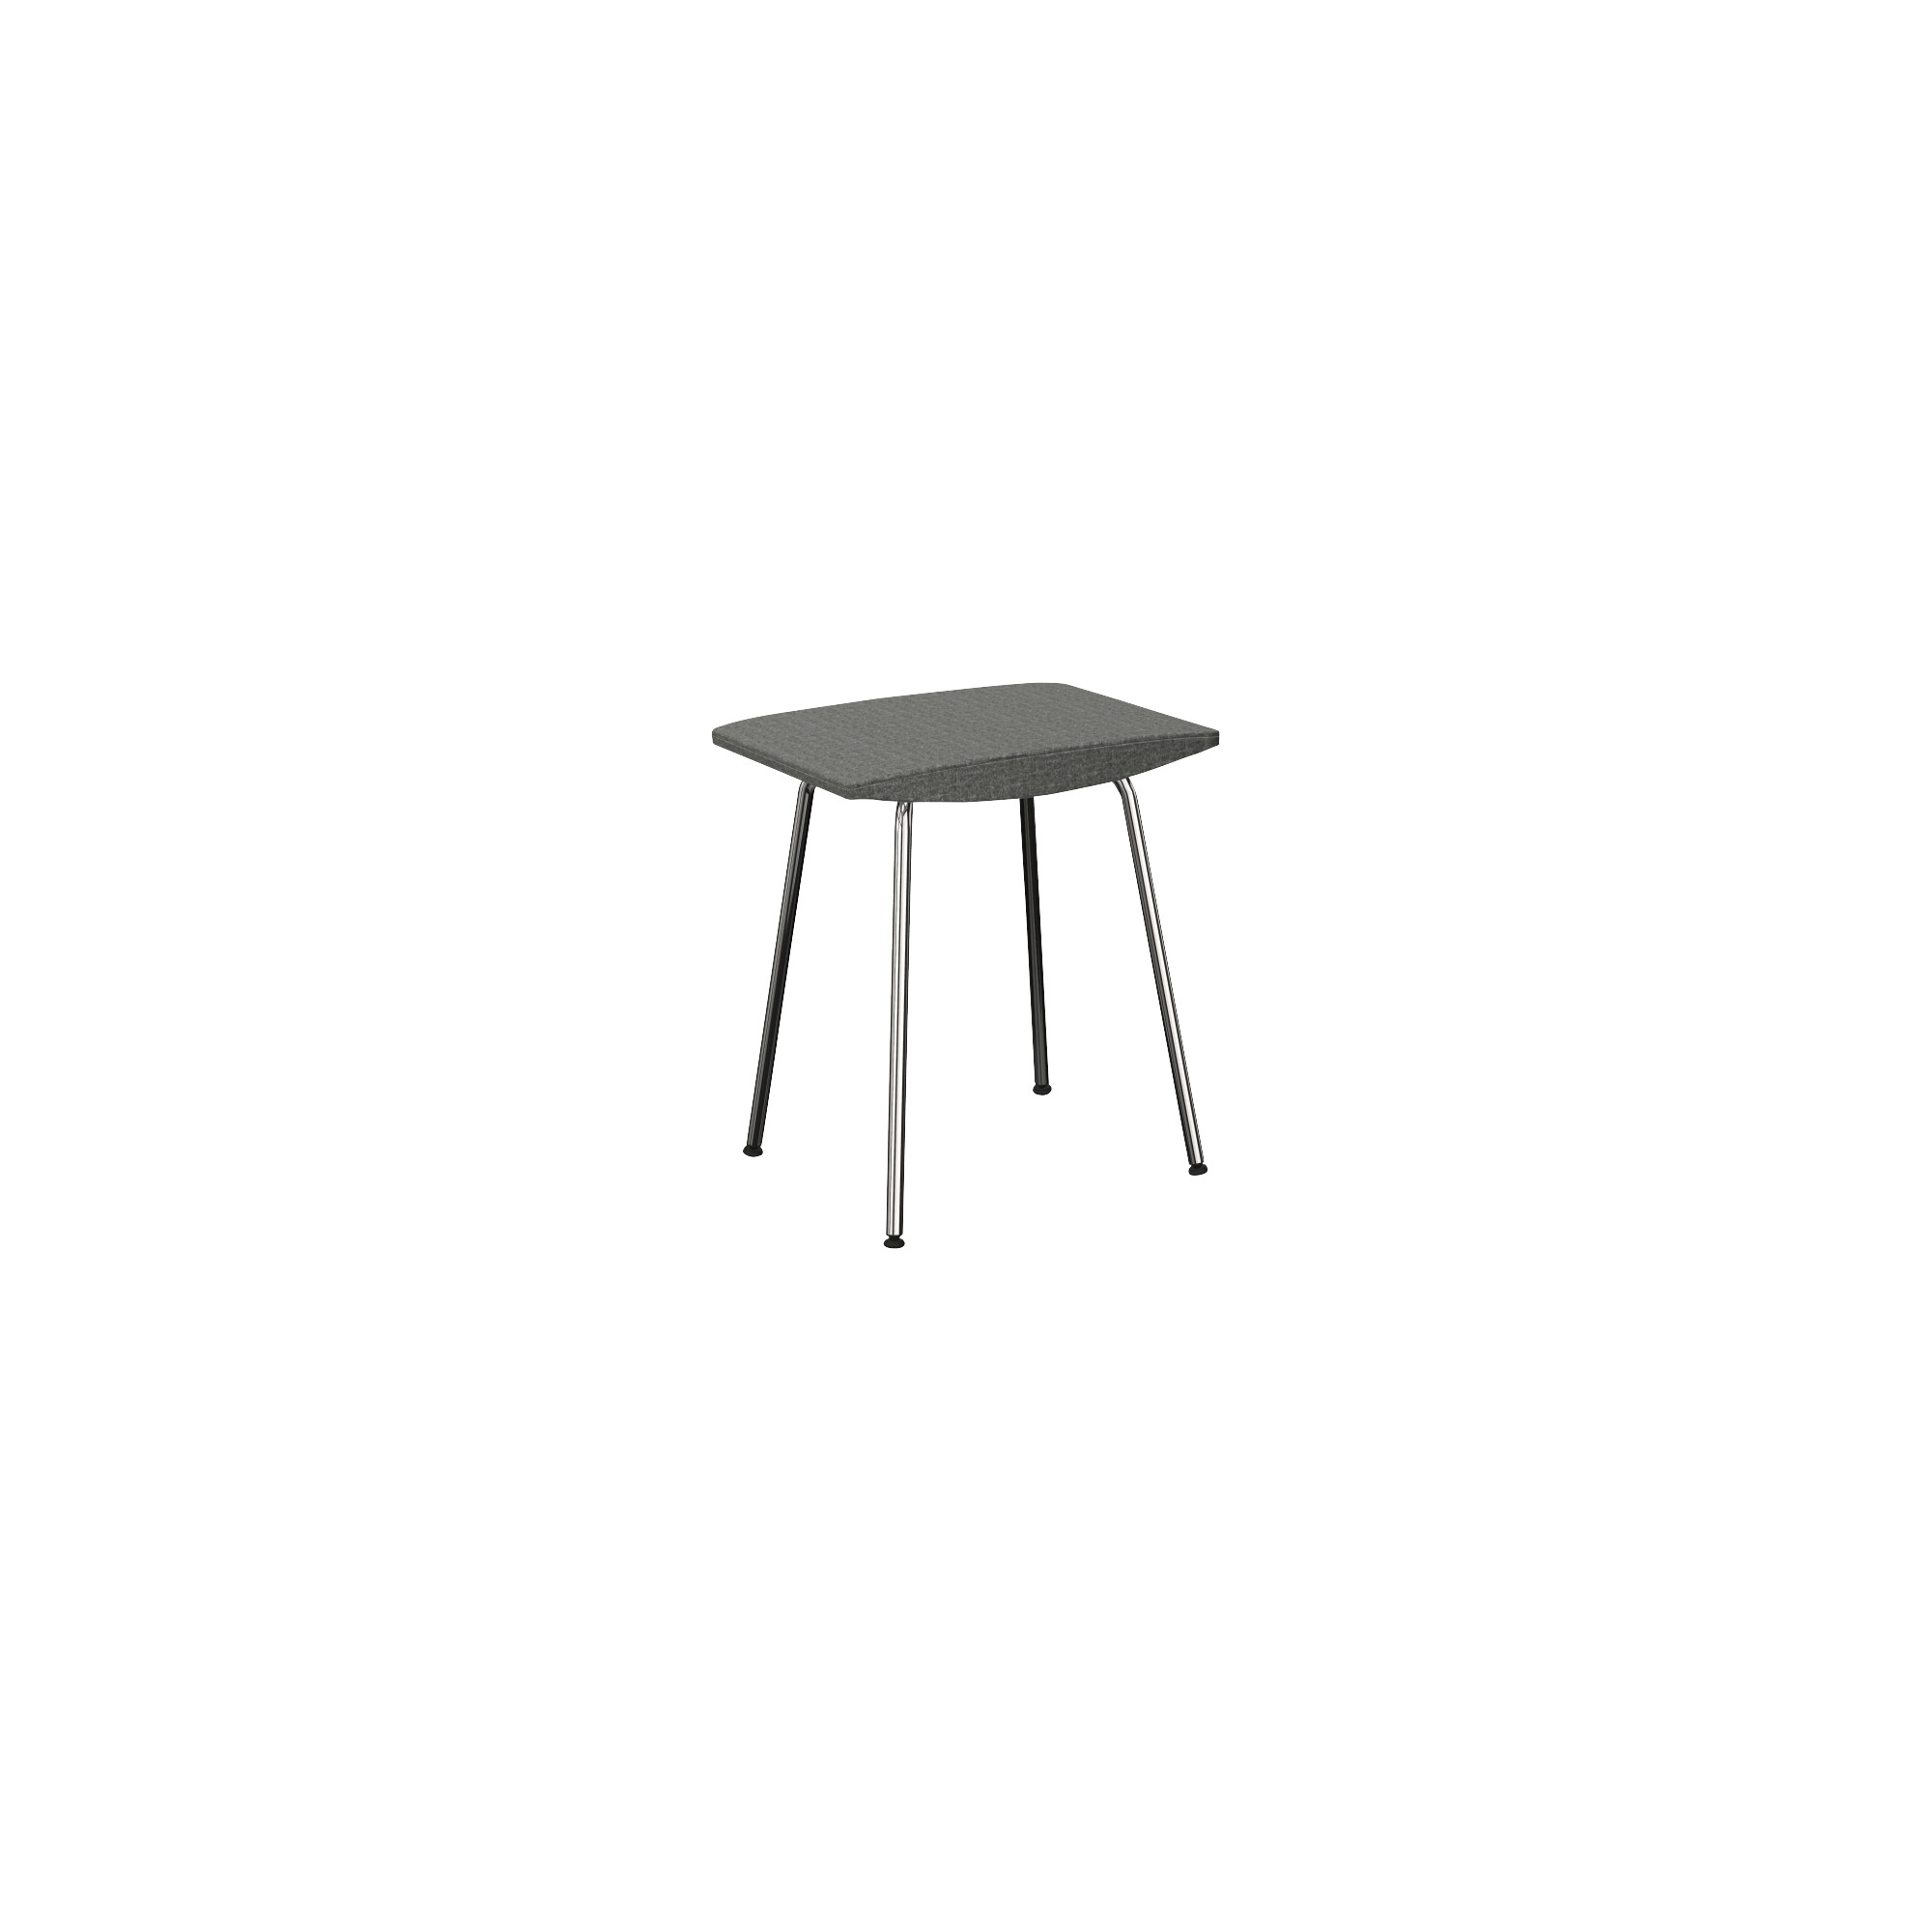 stool with grey seat and metal legs